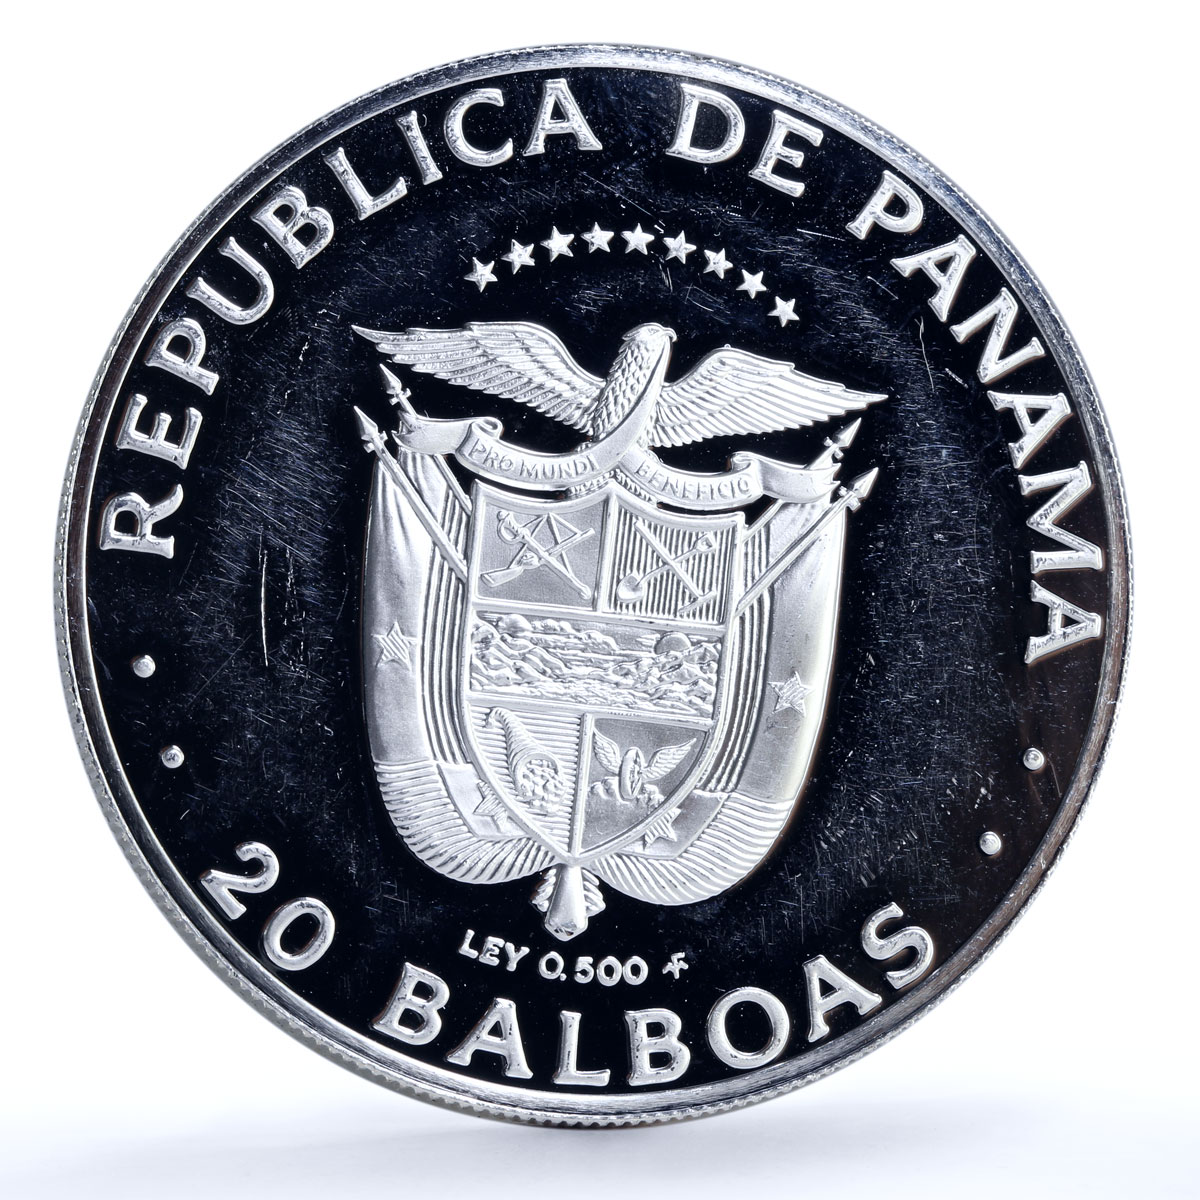 Panama 20 balboas Discoverer of the Pacific proof silver coin 1985